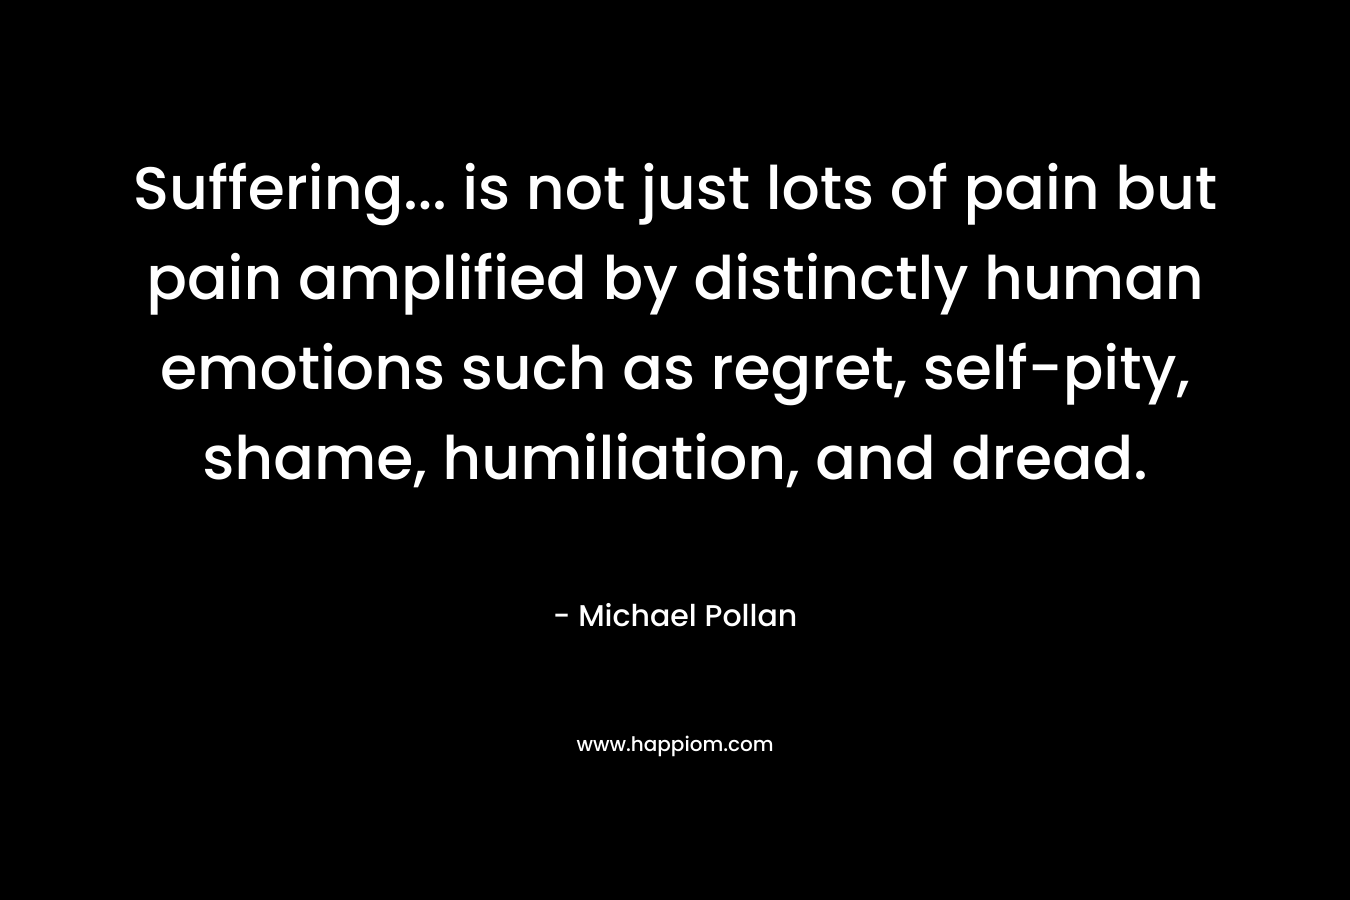 Suffering… is not just lots of pain but pain amplified by distinctly human emotions such as regret, self-pity, shame, humiliation, and dread. – Michael Pollan